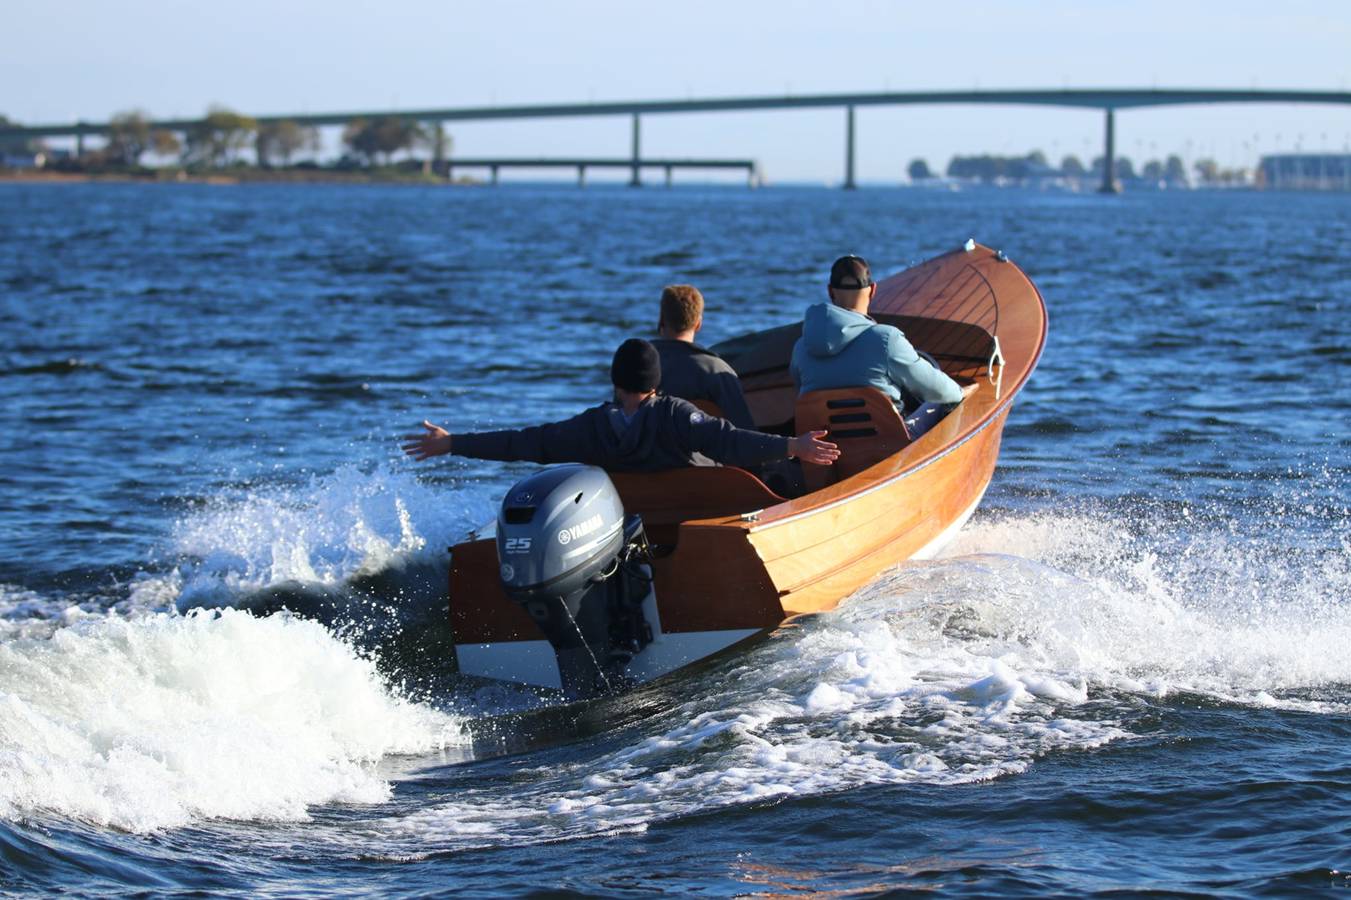 Rhode Runner - a modern kit-built wooden motorboat in the style of a classic 1950s runabout